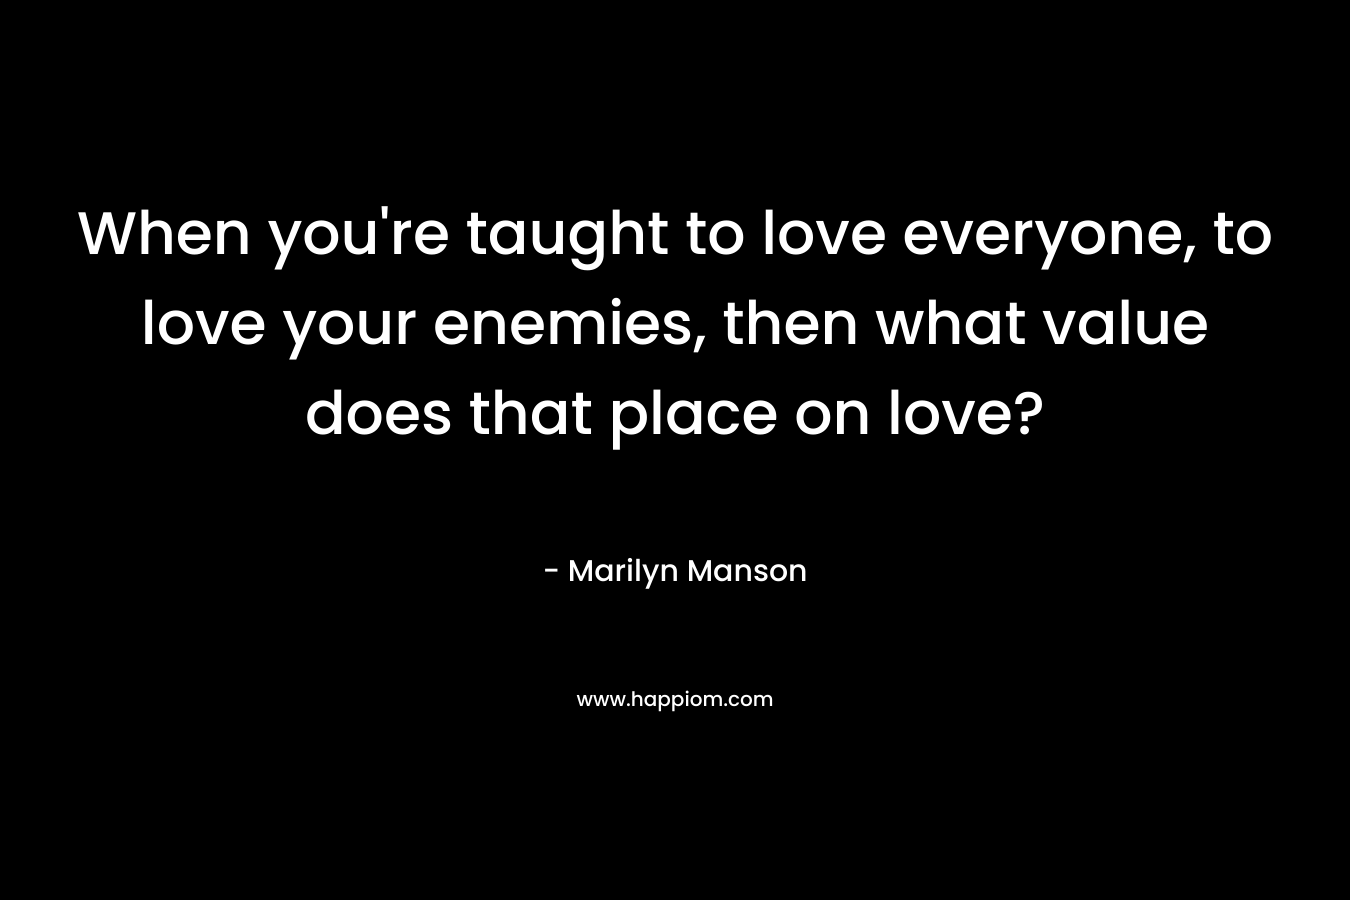 When you’re taught to love everyone, to love your enemies, then what value does that place on love? – Marilyn Manson